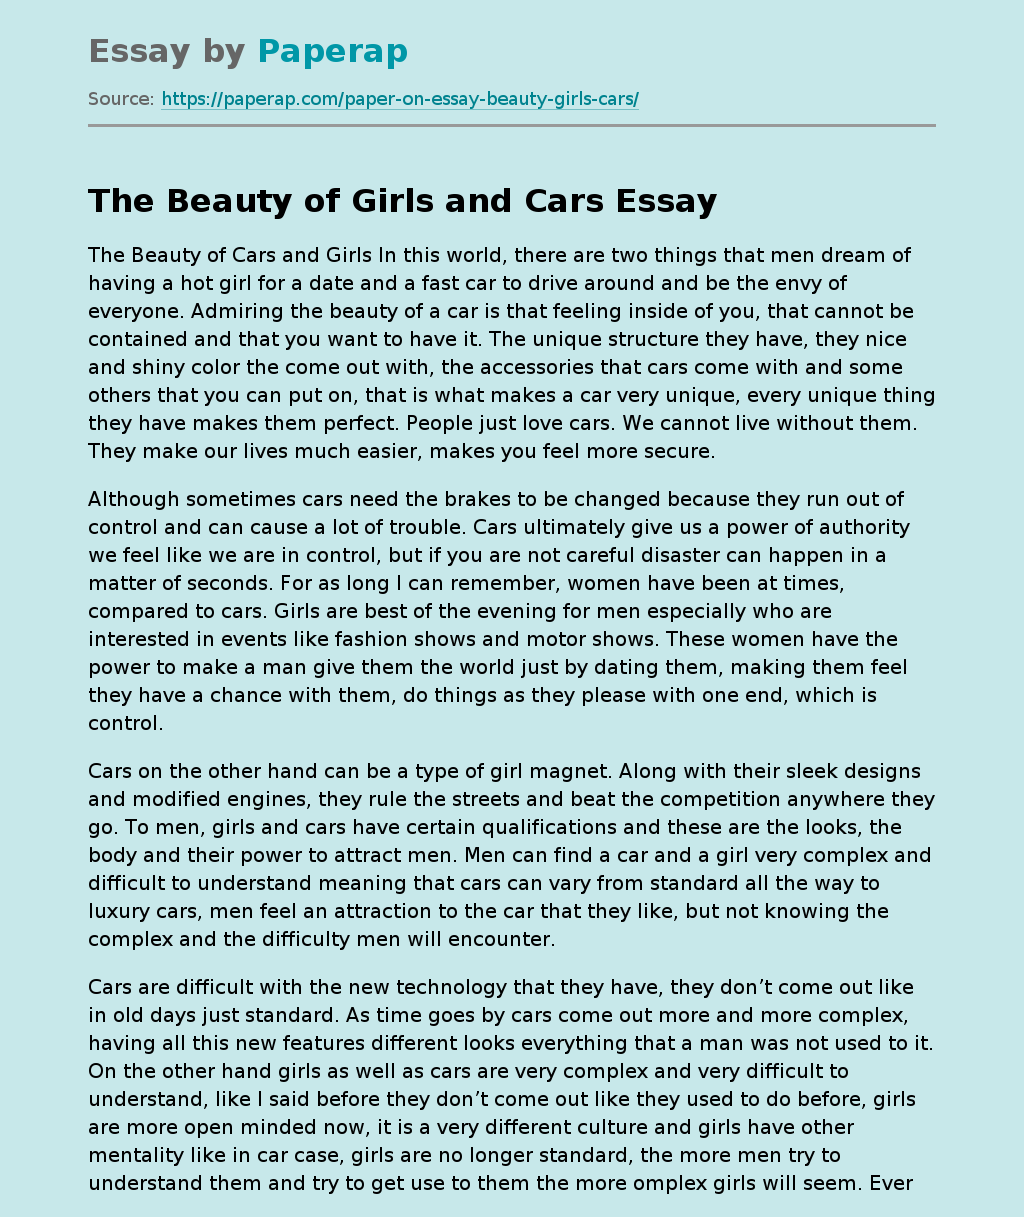 The Beauty of Girls and Cars